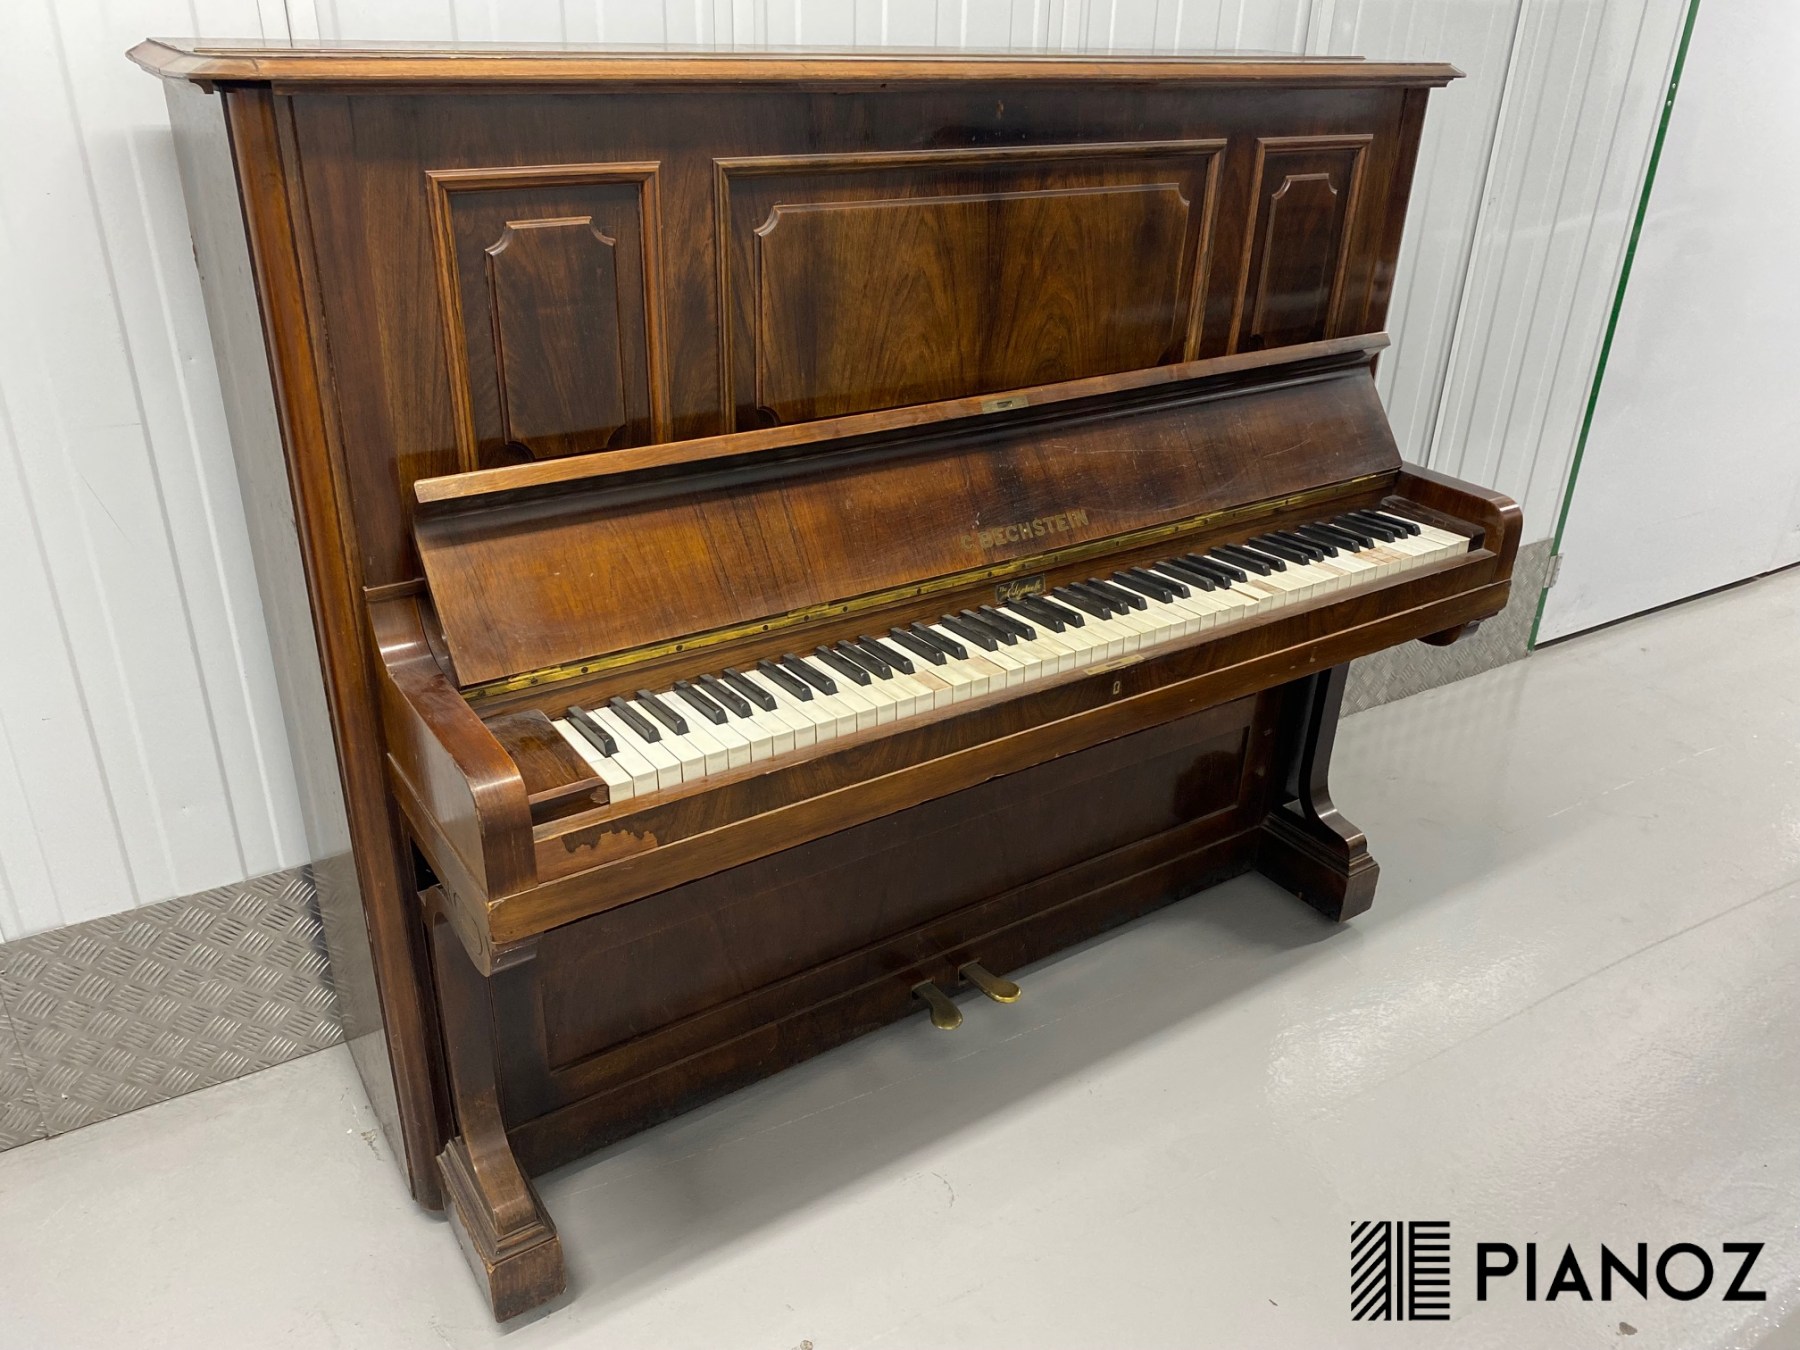 C. Bechstein Model 8 Upright Piano piano for sale in UK